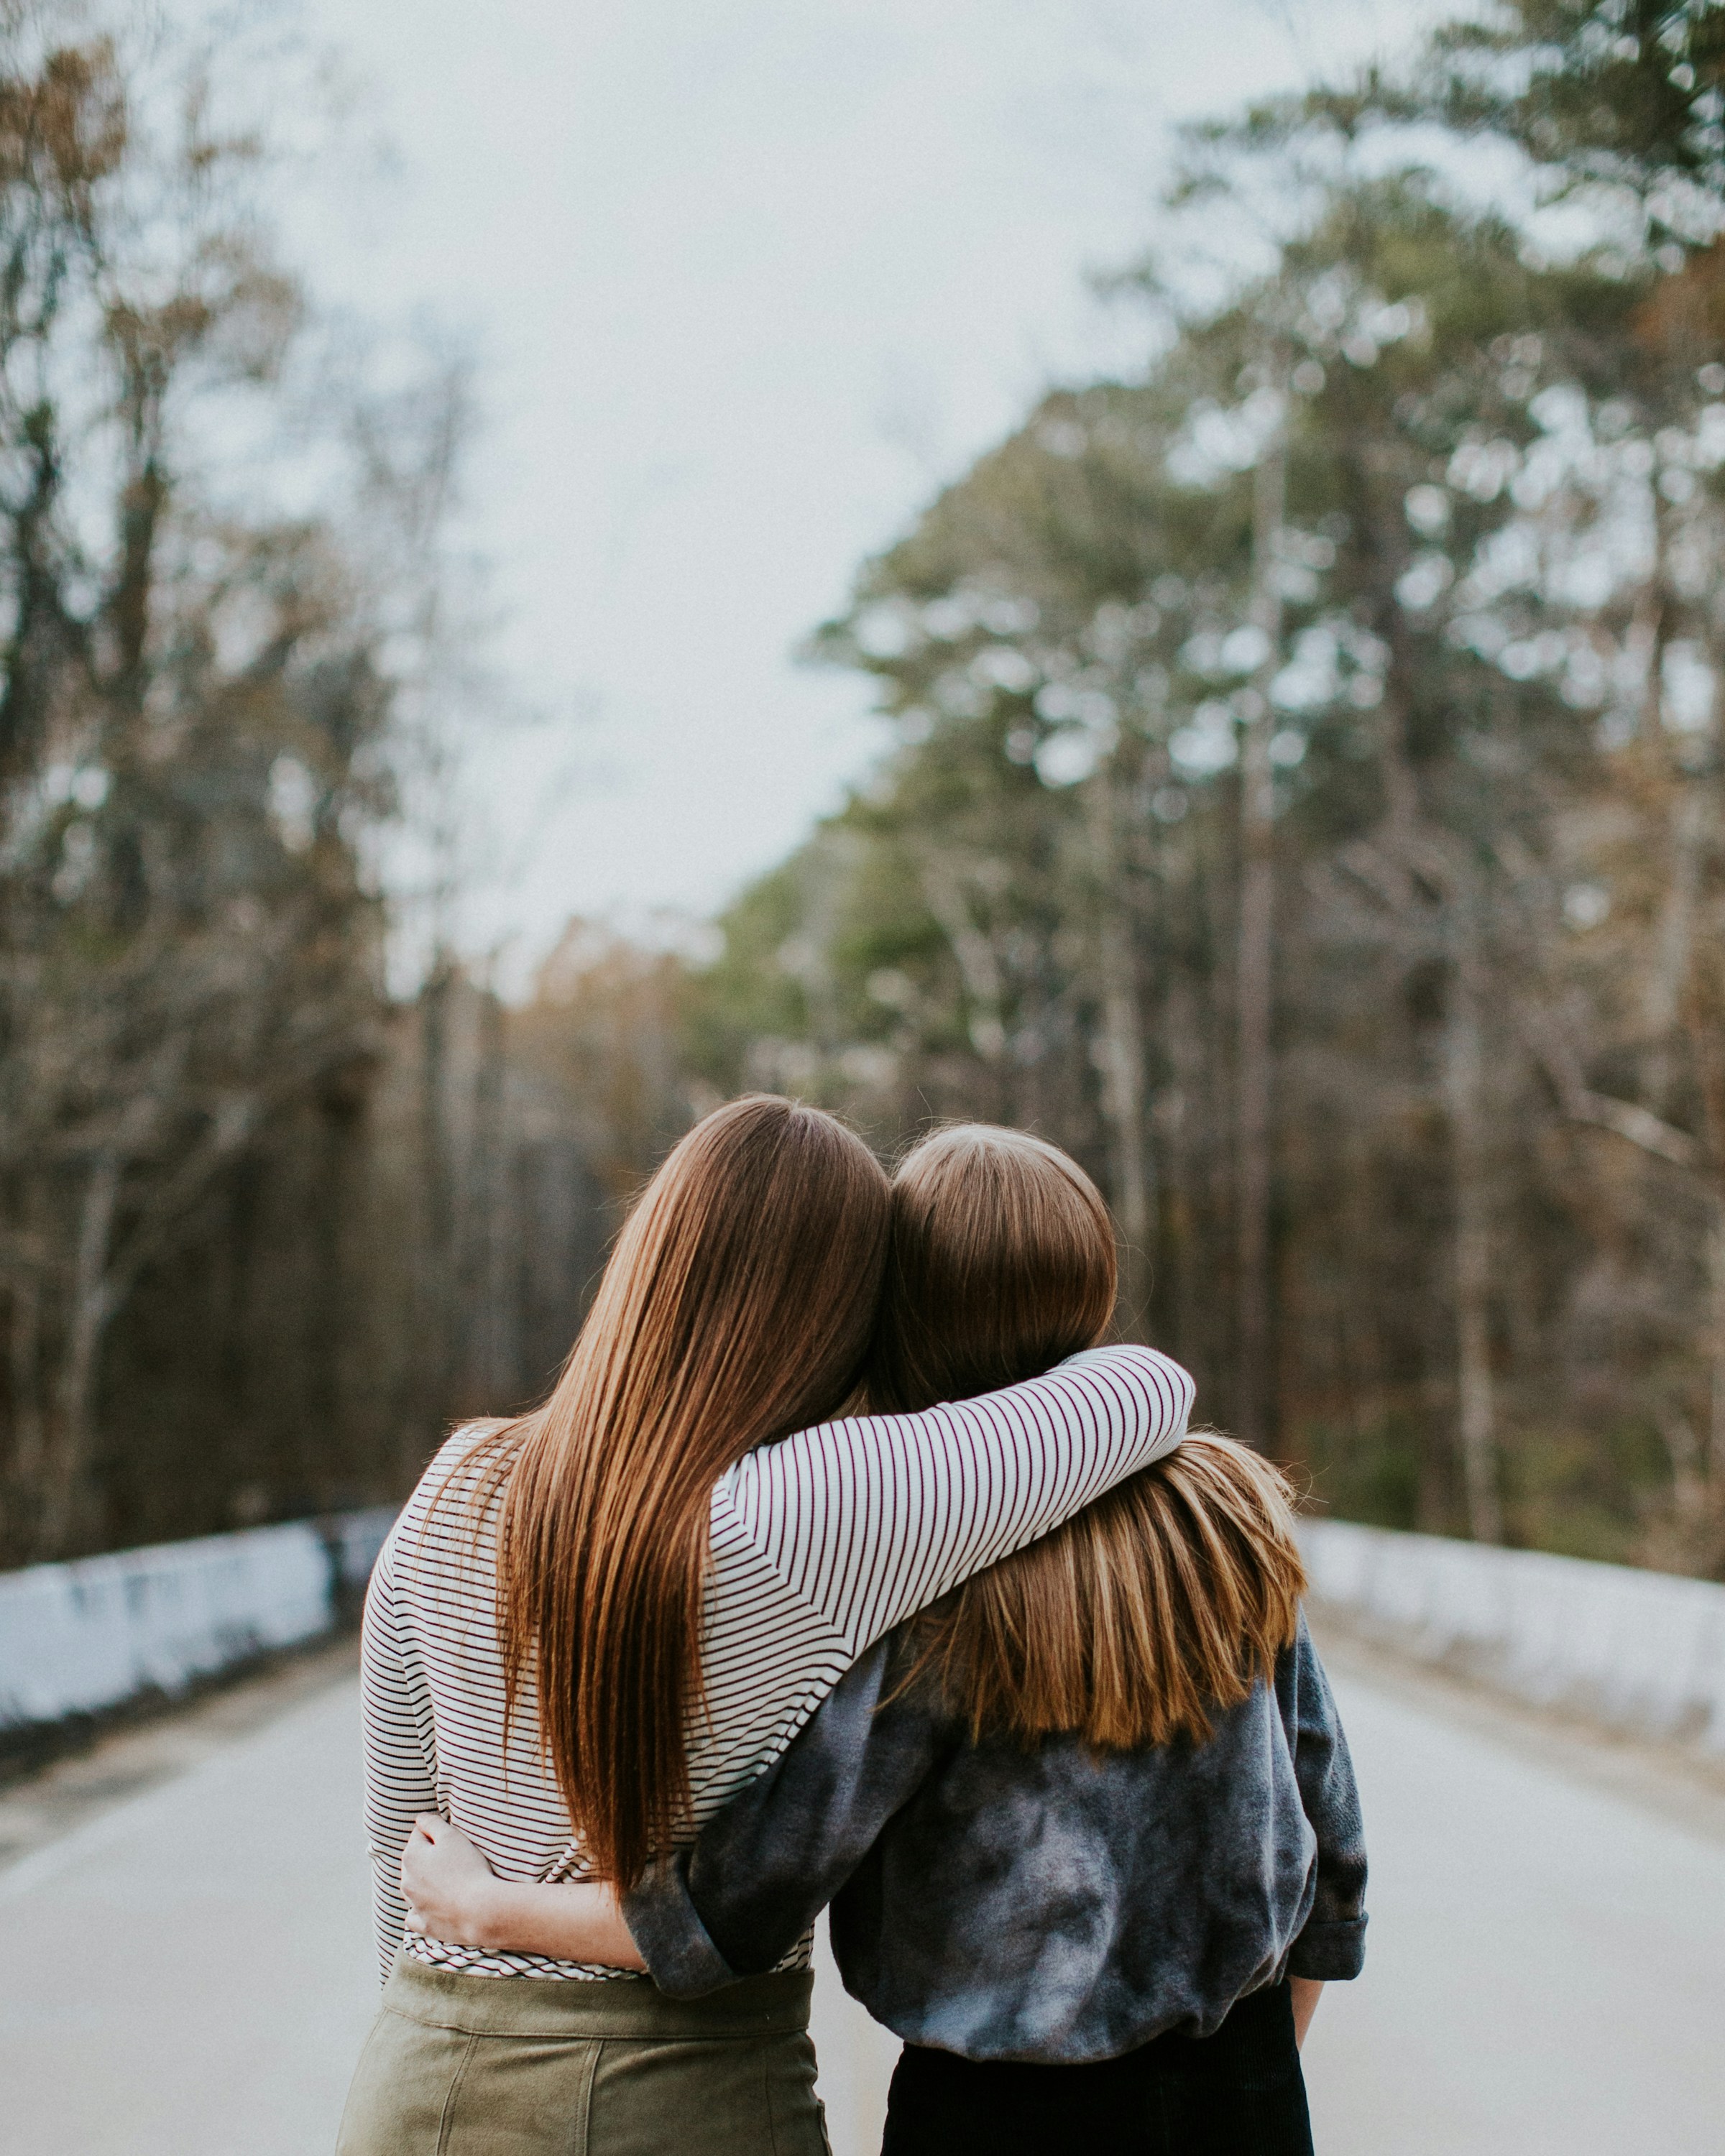 Two women holding each other | Source: Unsplash